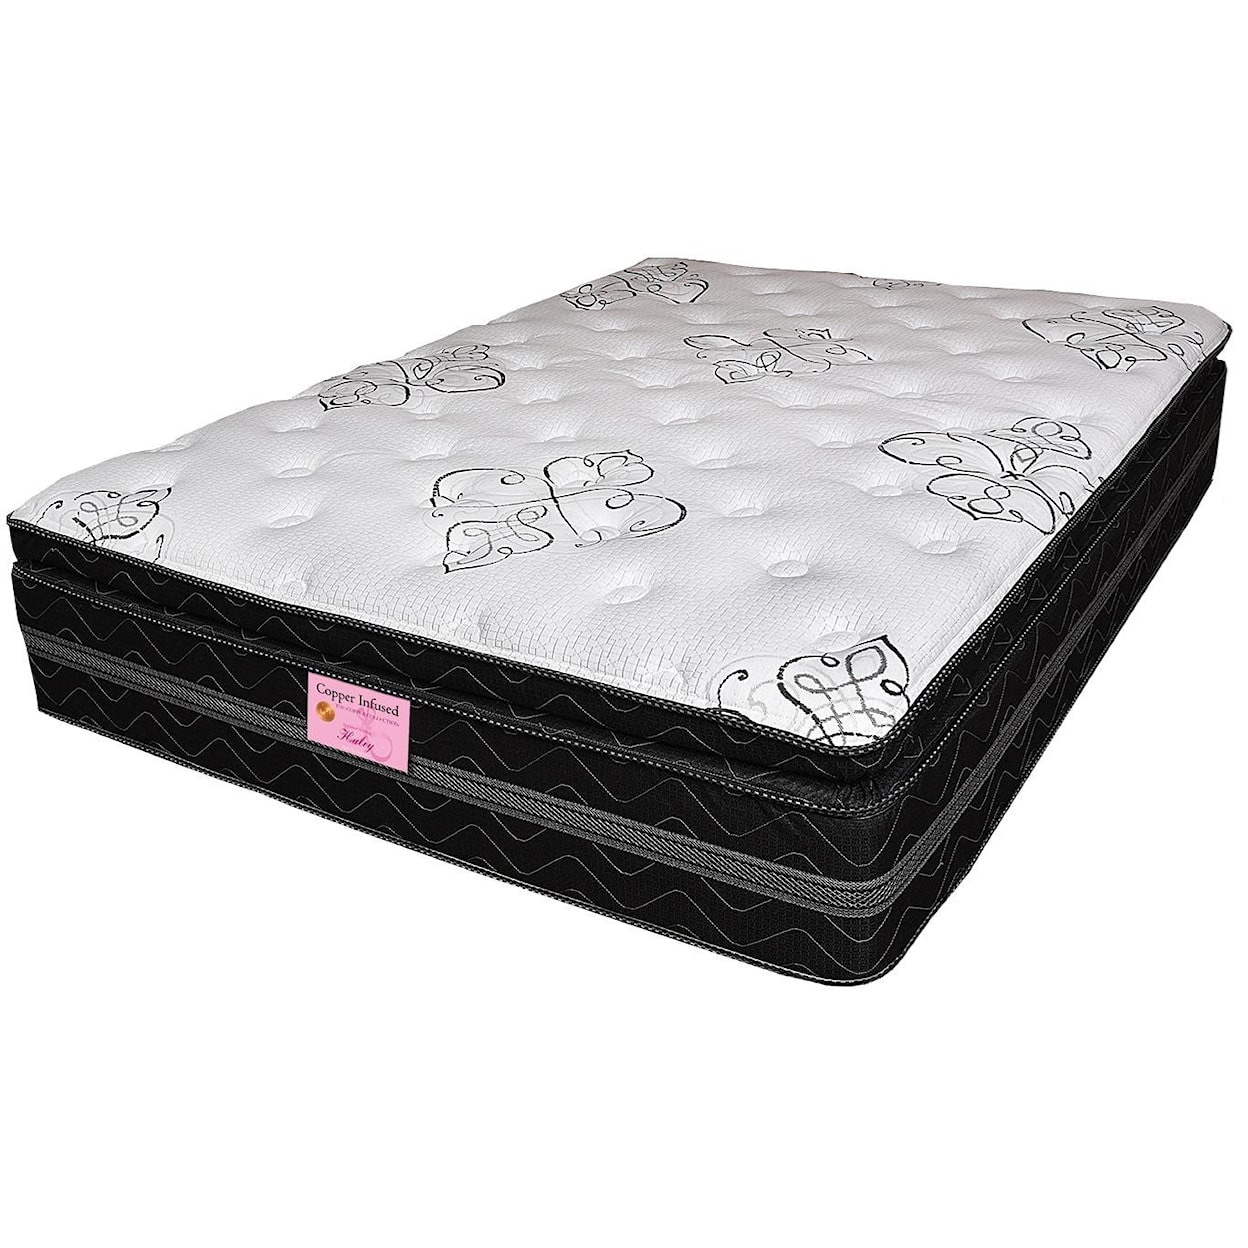 United Bedding Haley P Queen Pocketed Coil Mattress